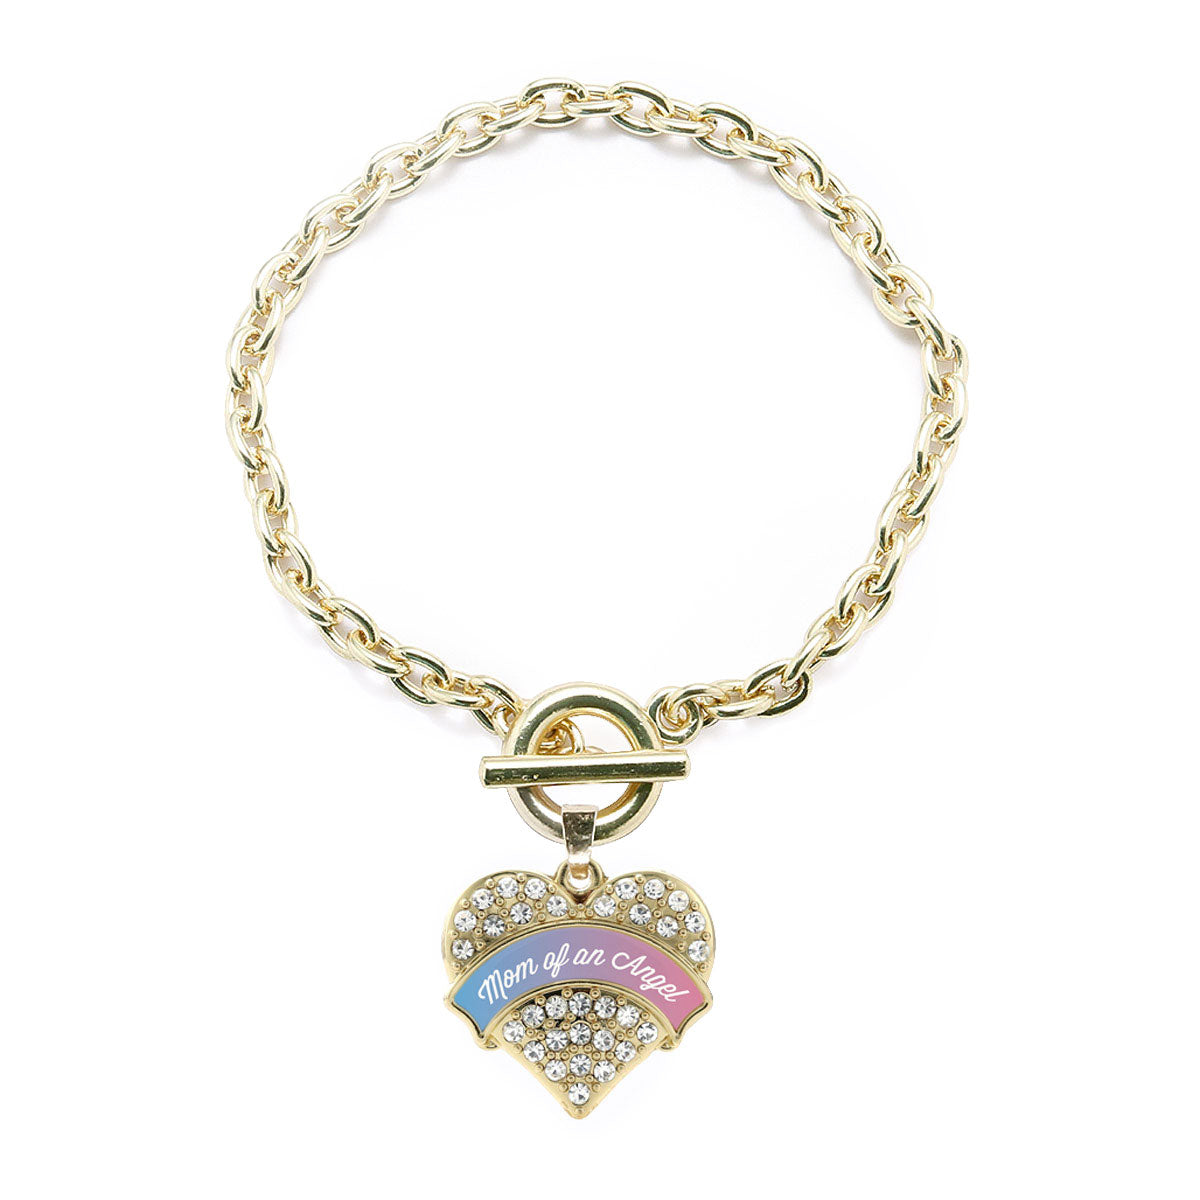 Gold Mom of an Angel Pave Heart Charm Toggle Bracelet